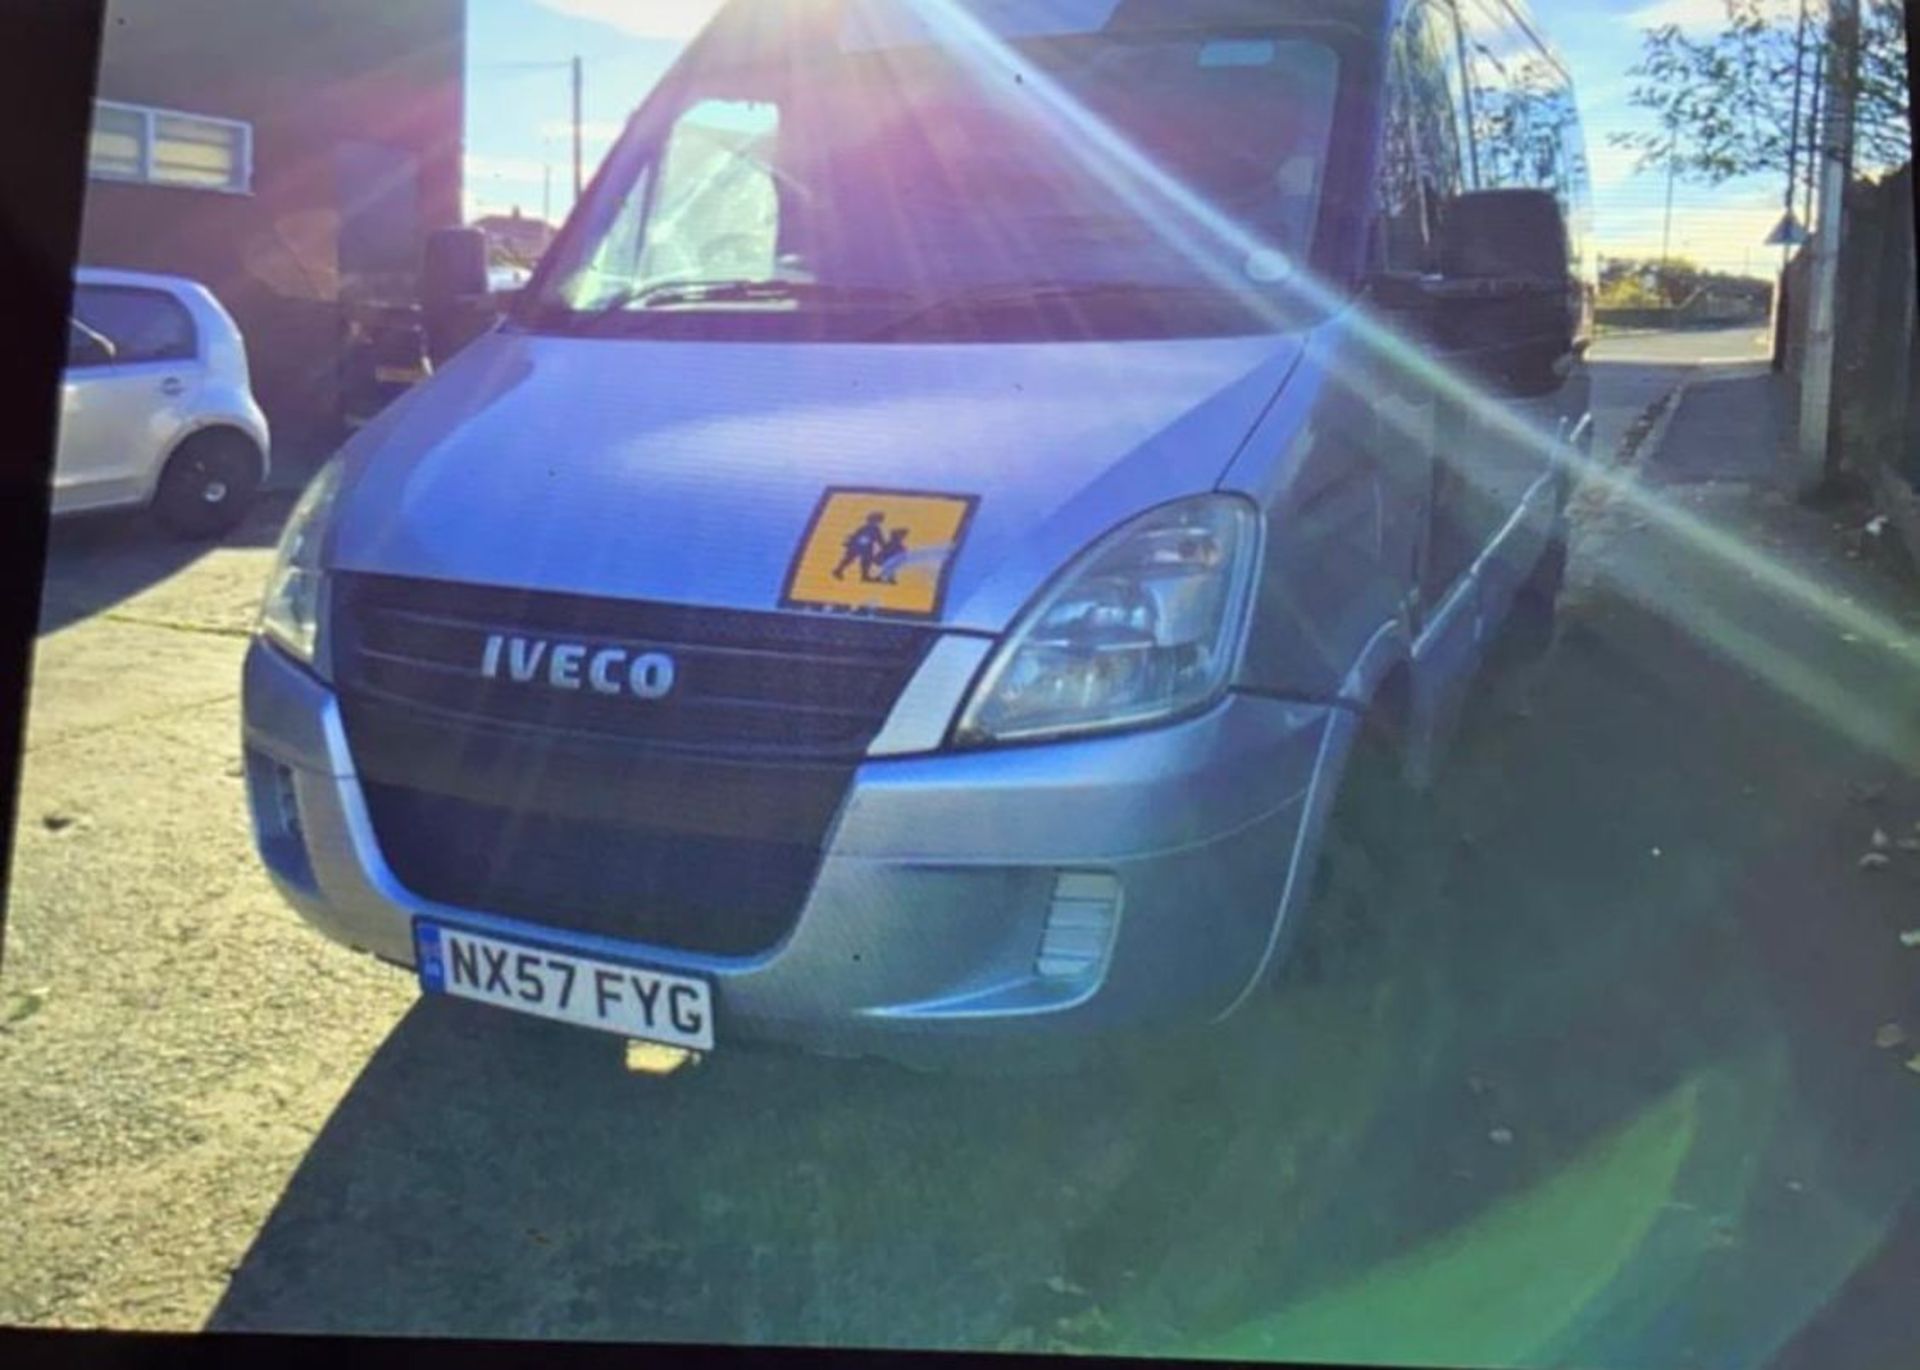 2007 iveco daily iries bus - Image 5 of 11